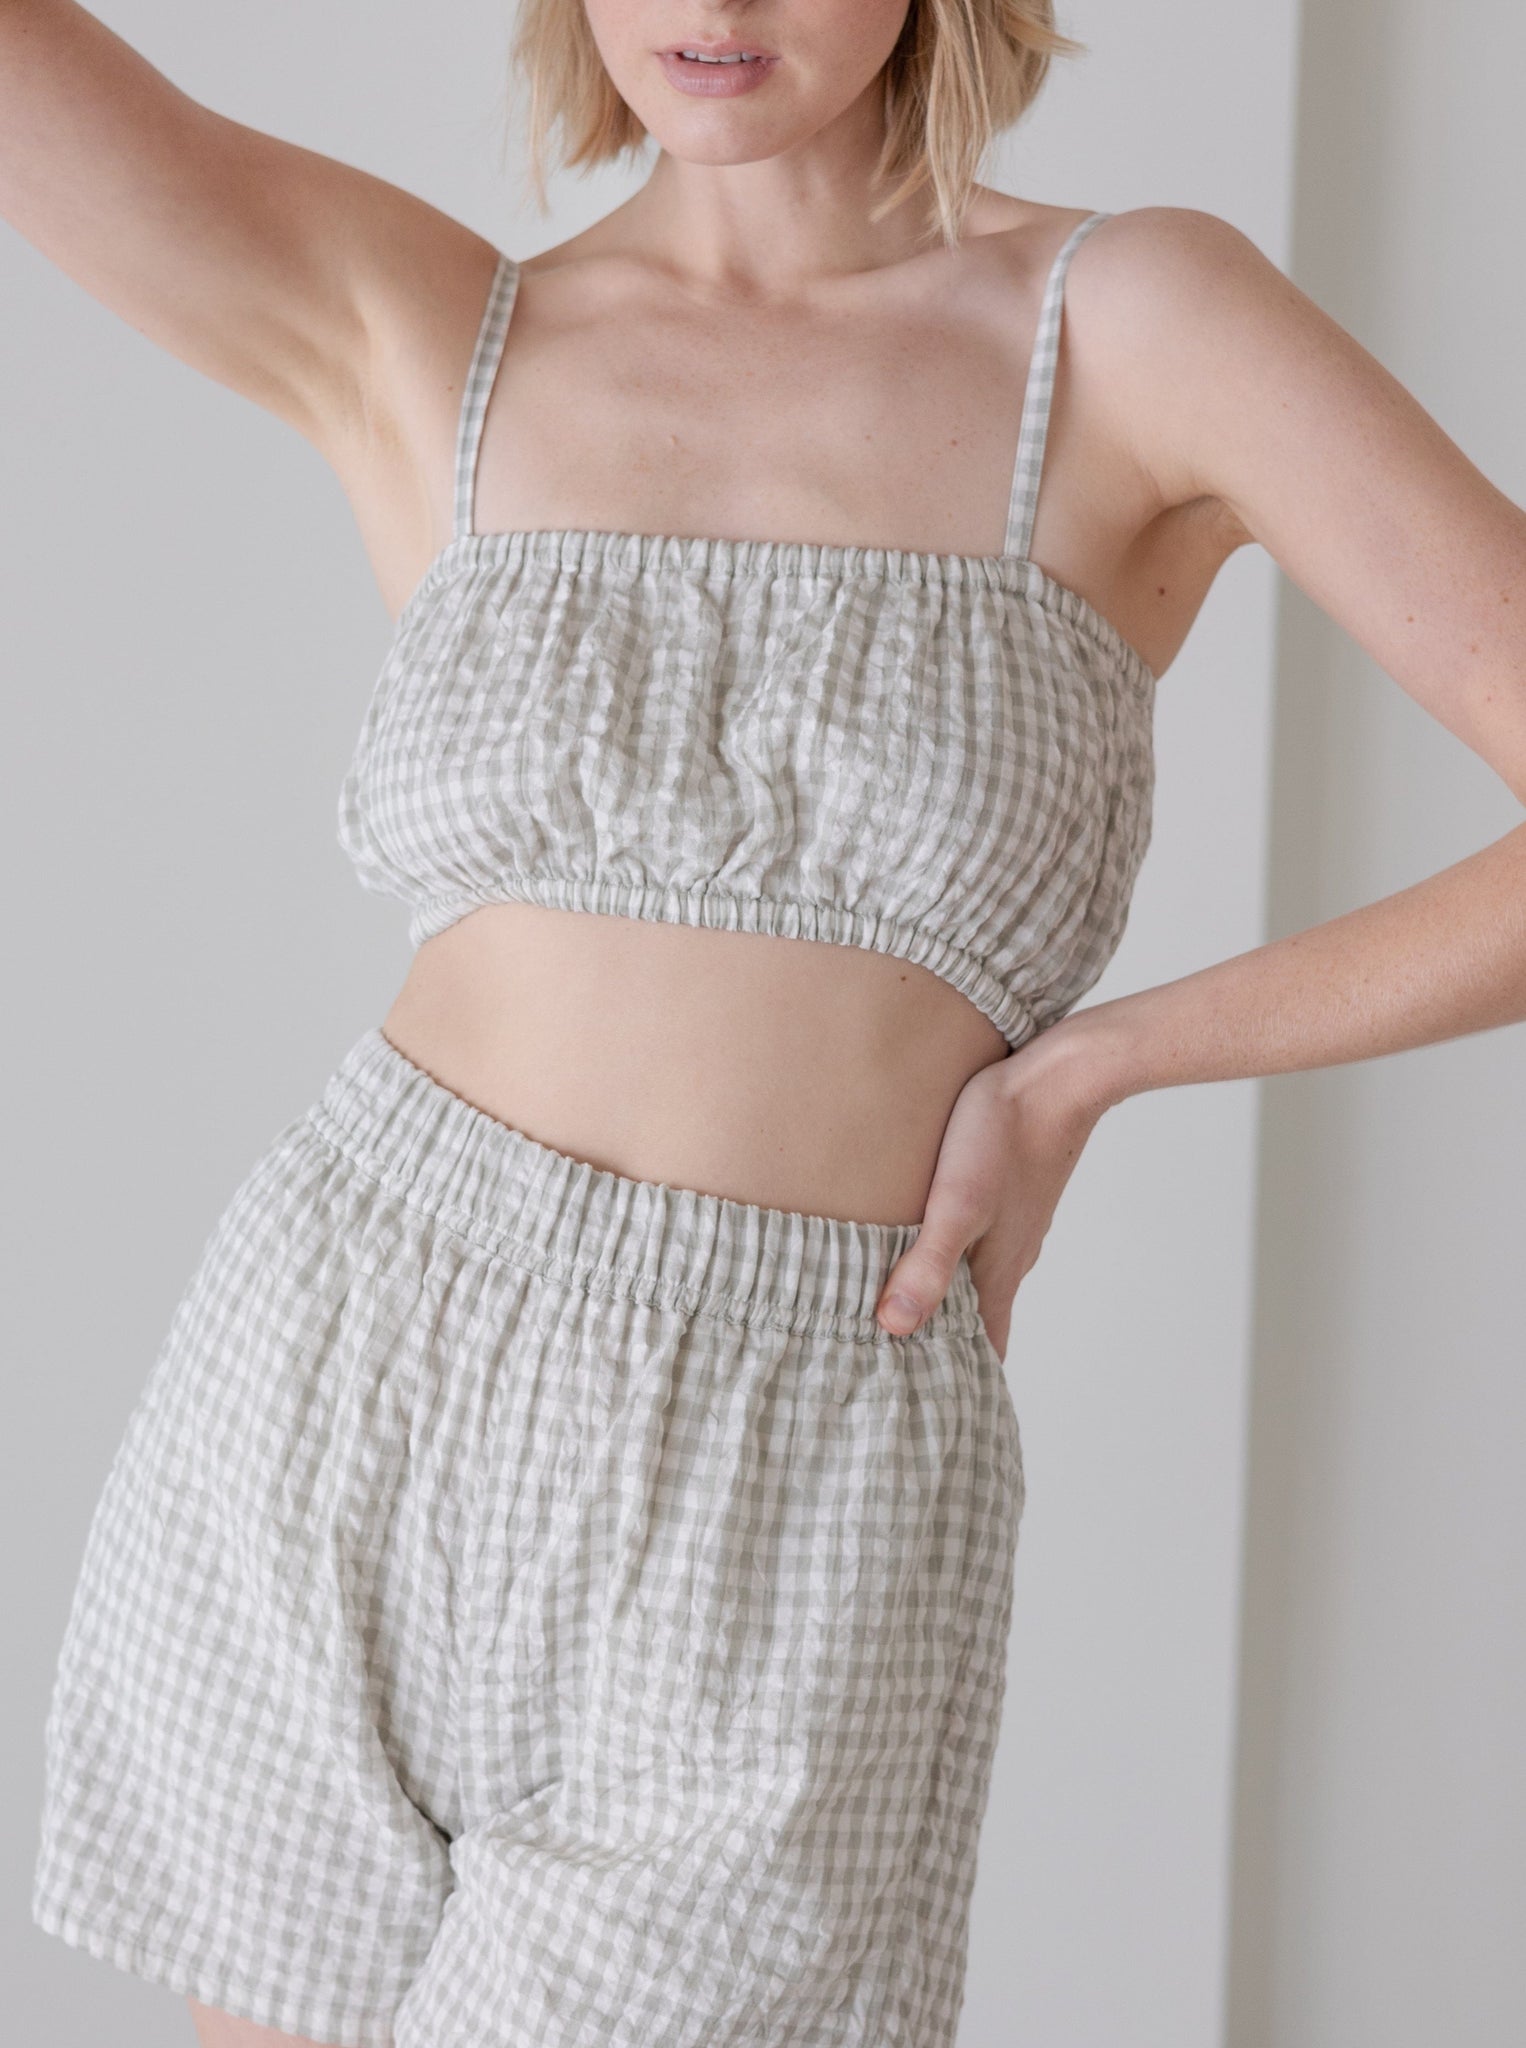 The model is wearing a hand Elastic Bandeau - Sky Gray Gingham - Sample top and shorts made from organic cotton.